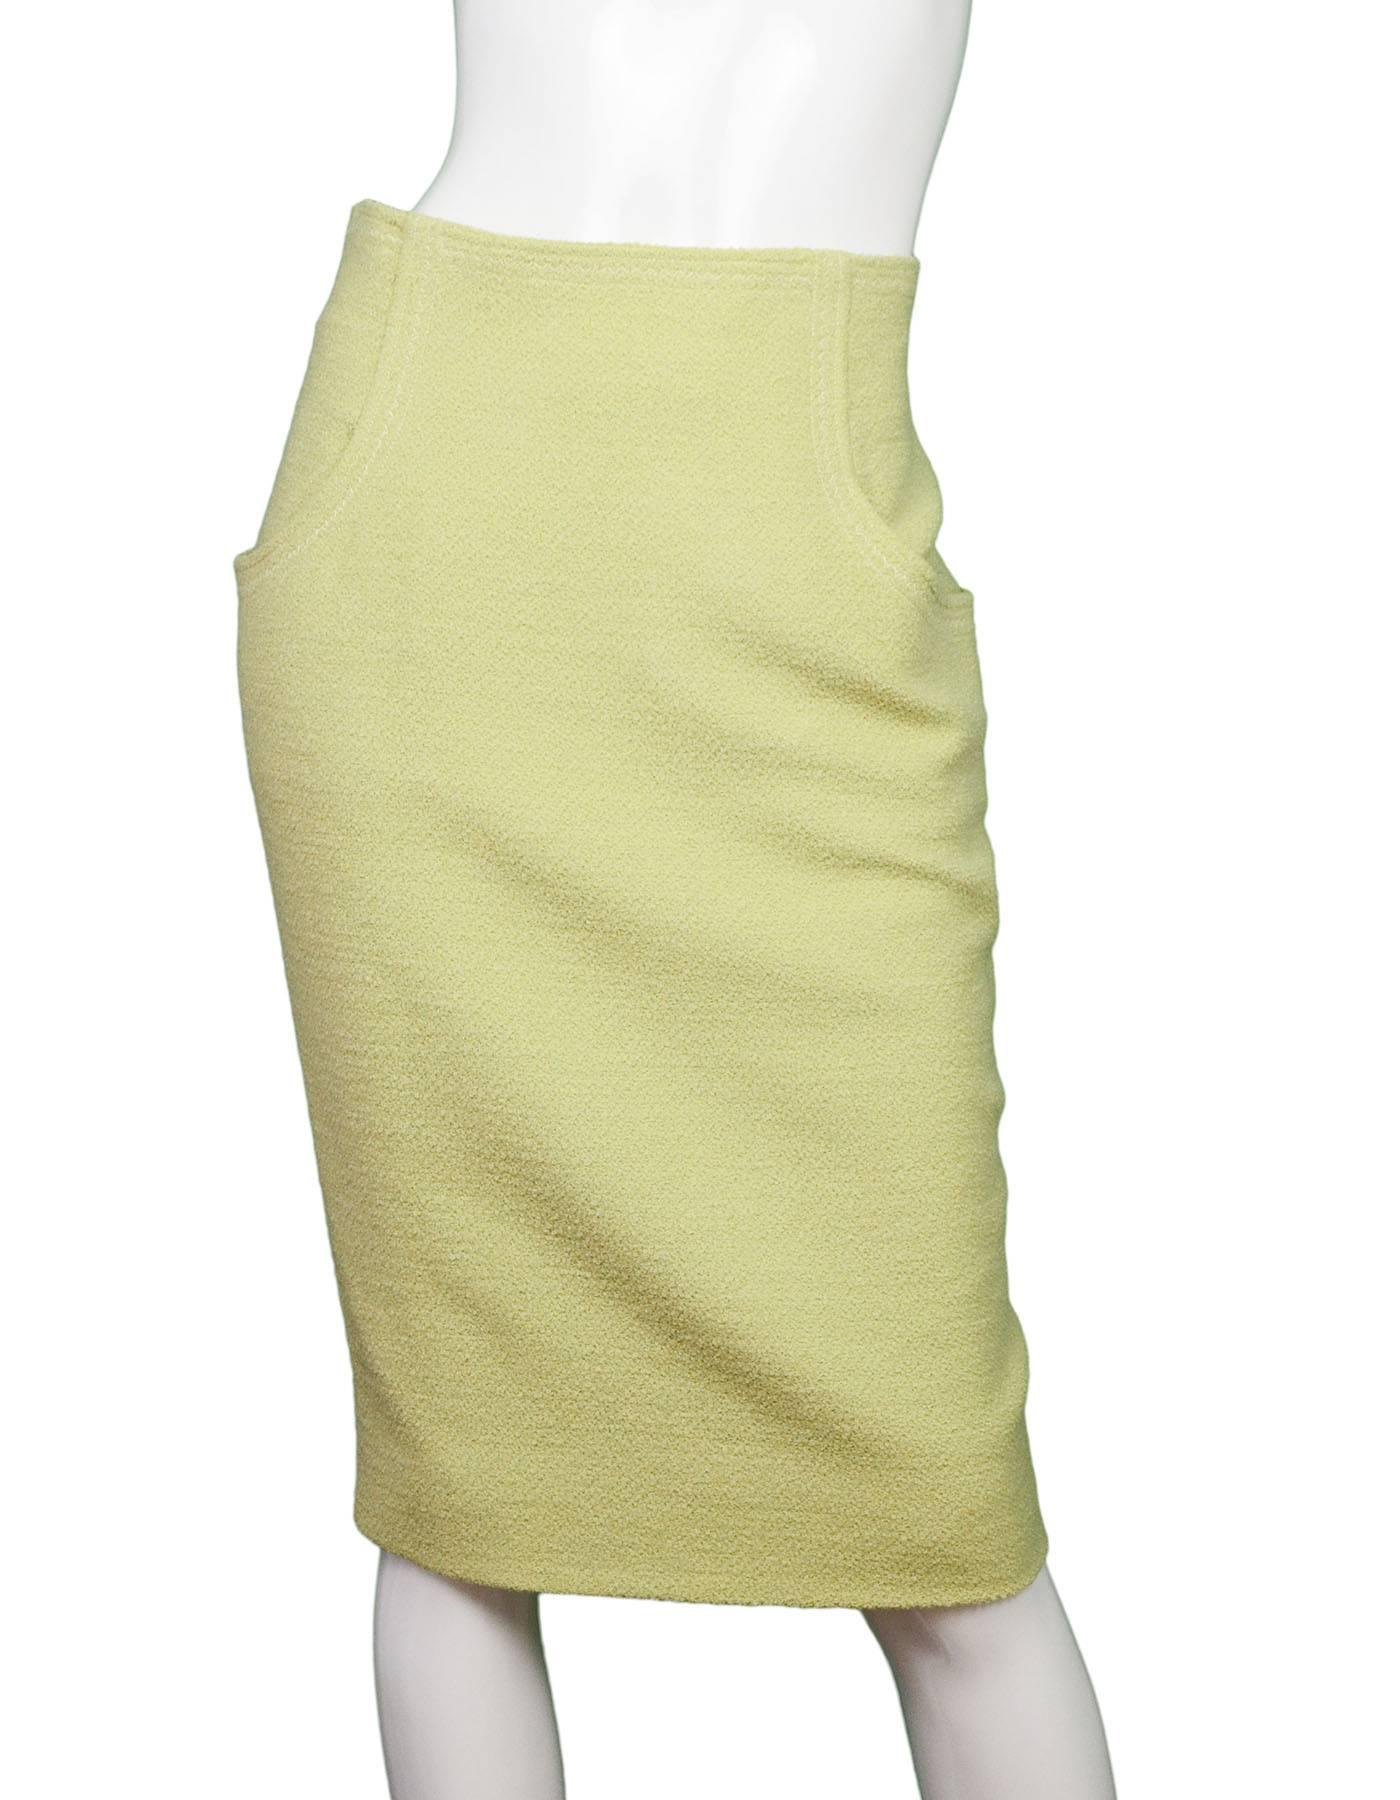 Chanel Chartreuse Boucle Skirt

Color: Chartreuse green
Composition: Not given- believed to be a wool blend
Lining: Chartreuse silk-blend
Closure/Opening: Back zip up closure
Exterior Pockets: Two hip pockets
Interior Pockets: None
Overall